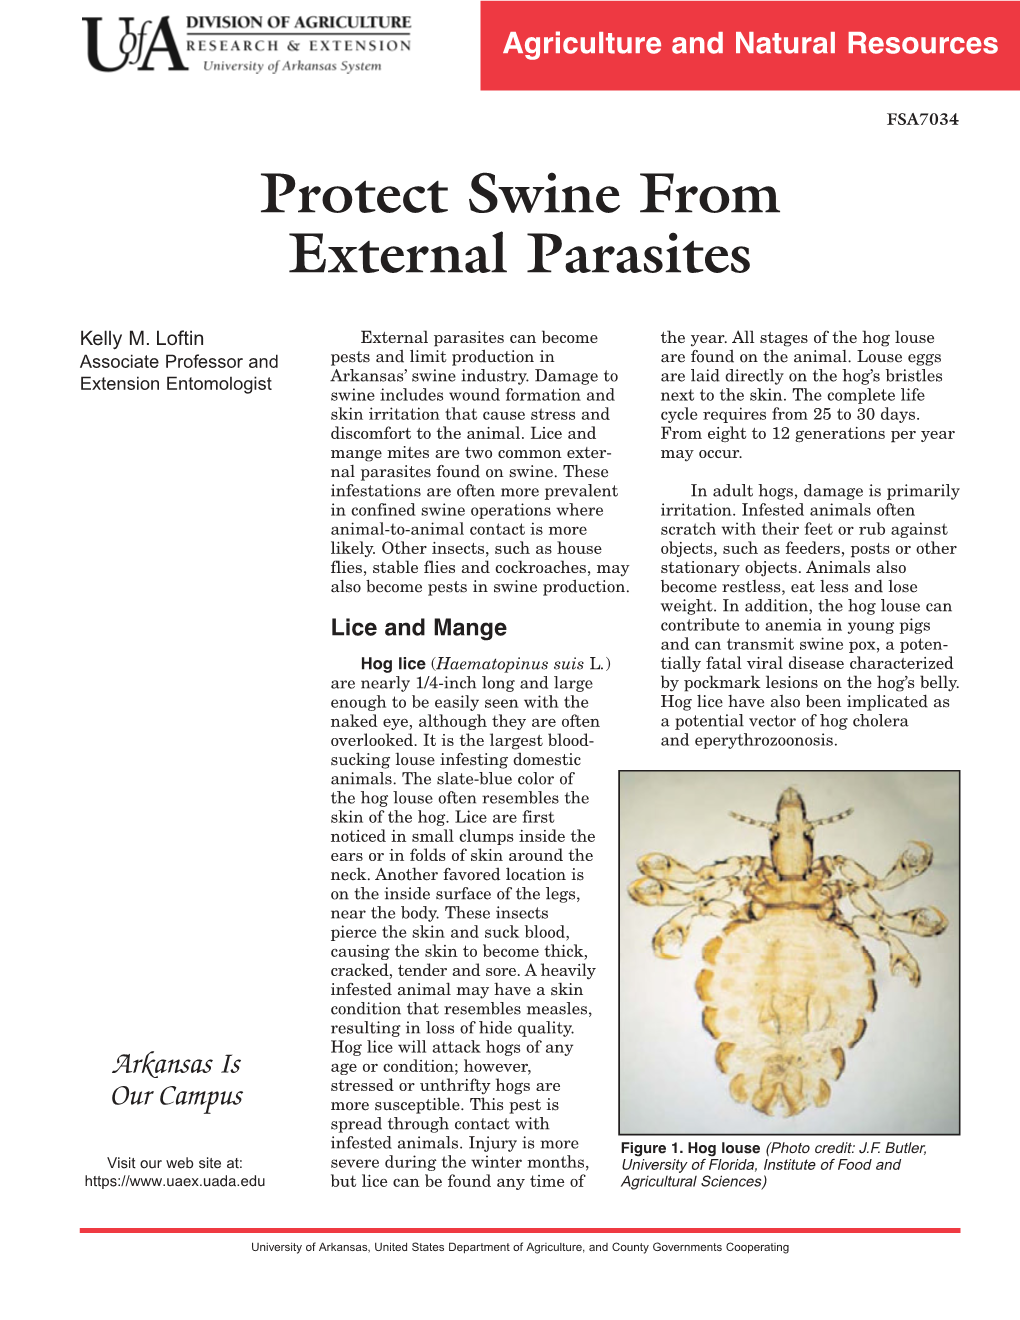 Protect Swine from External Parasites